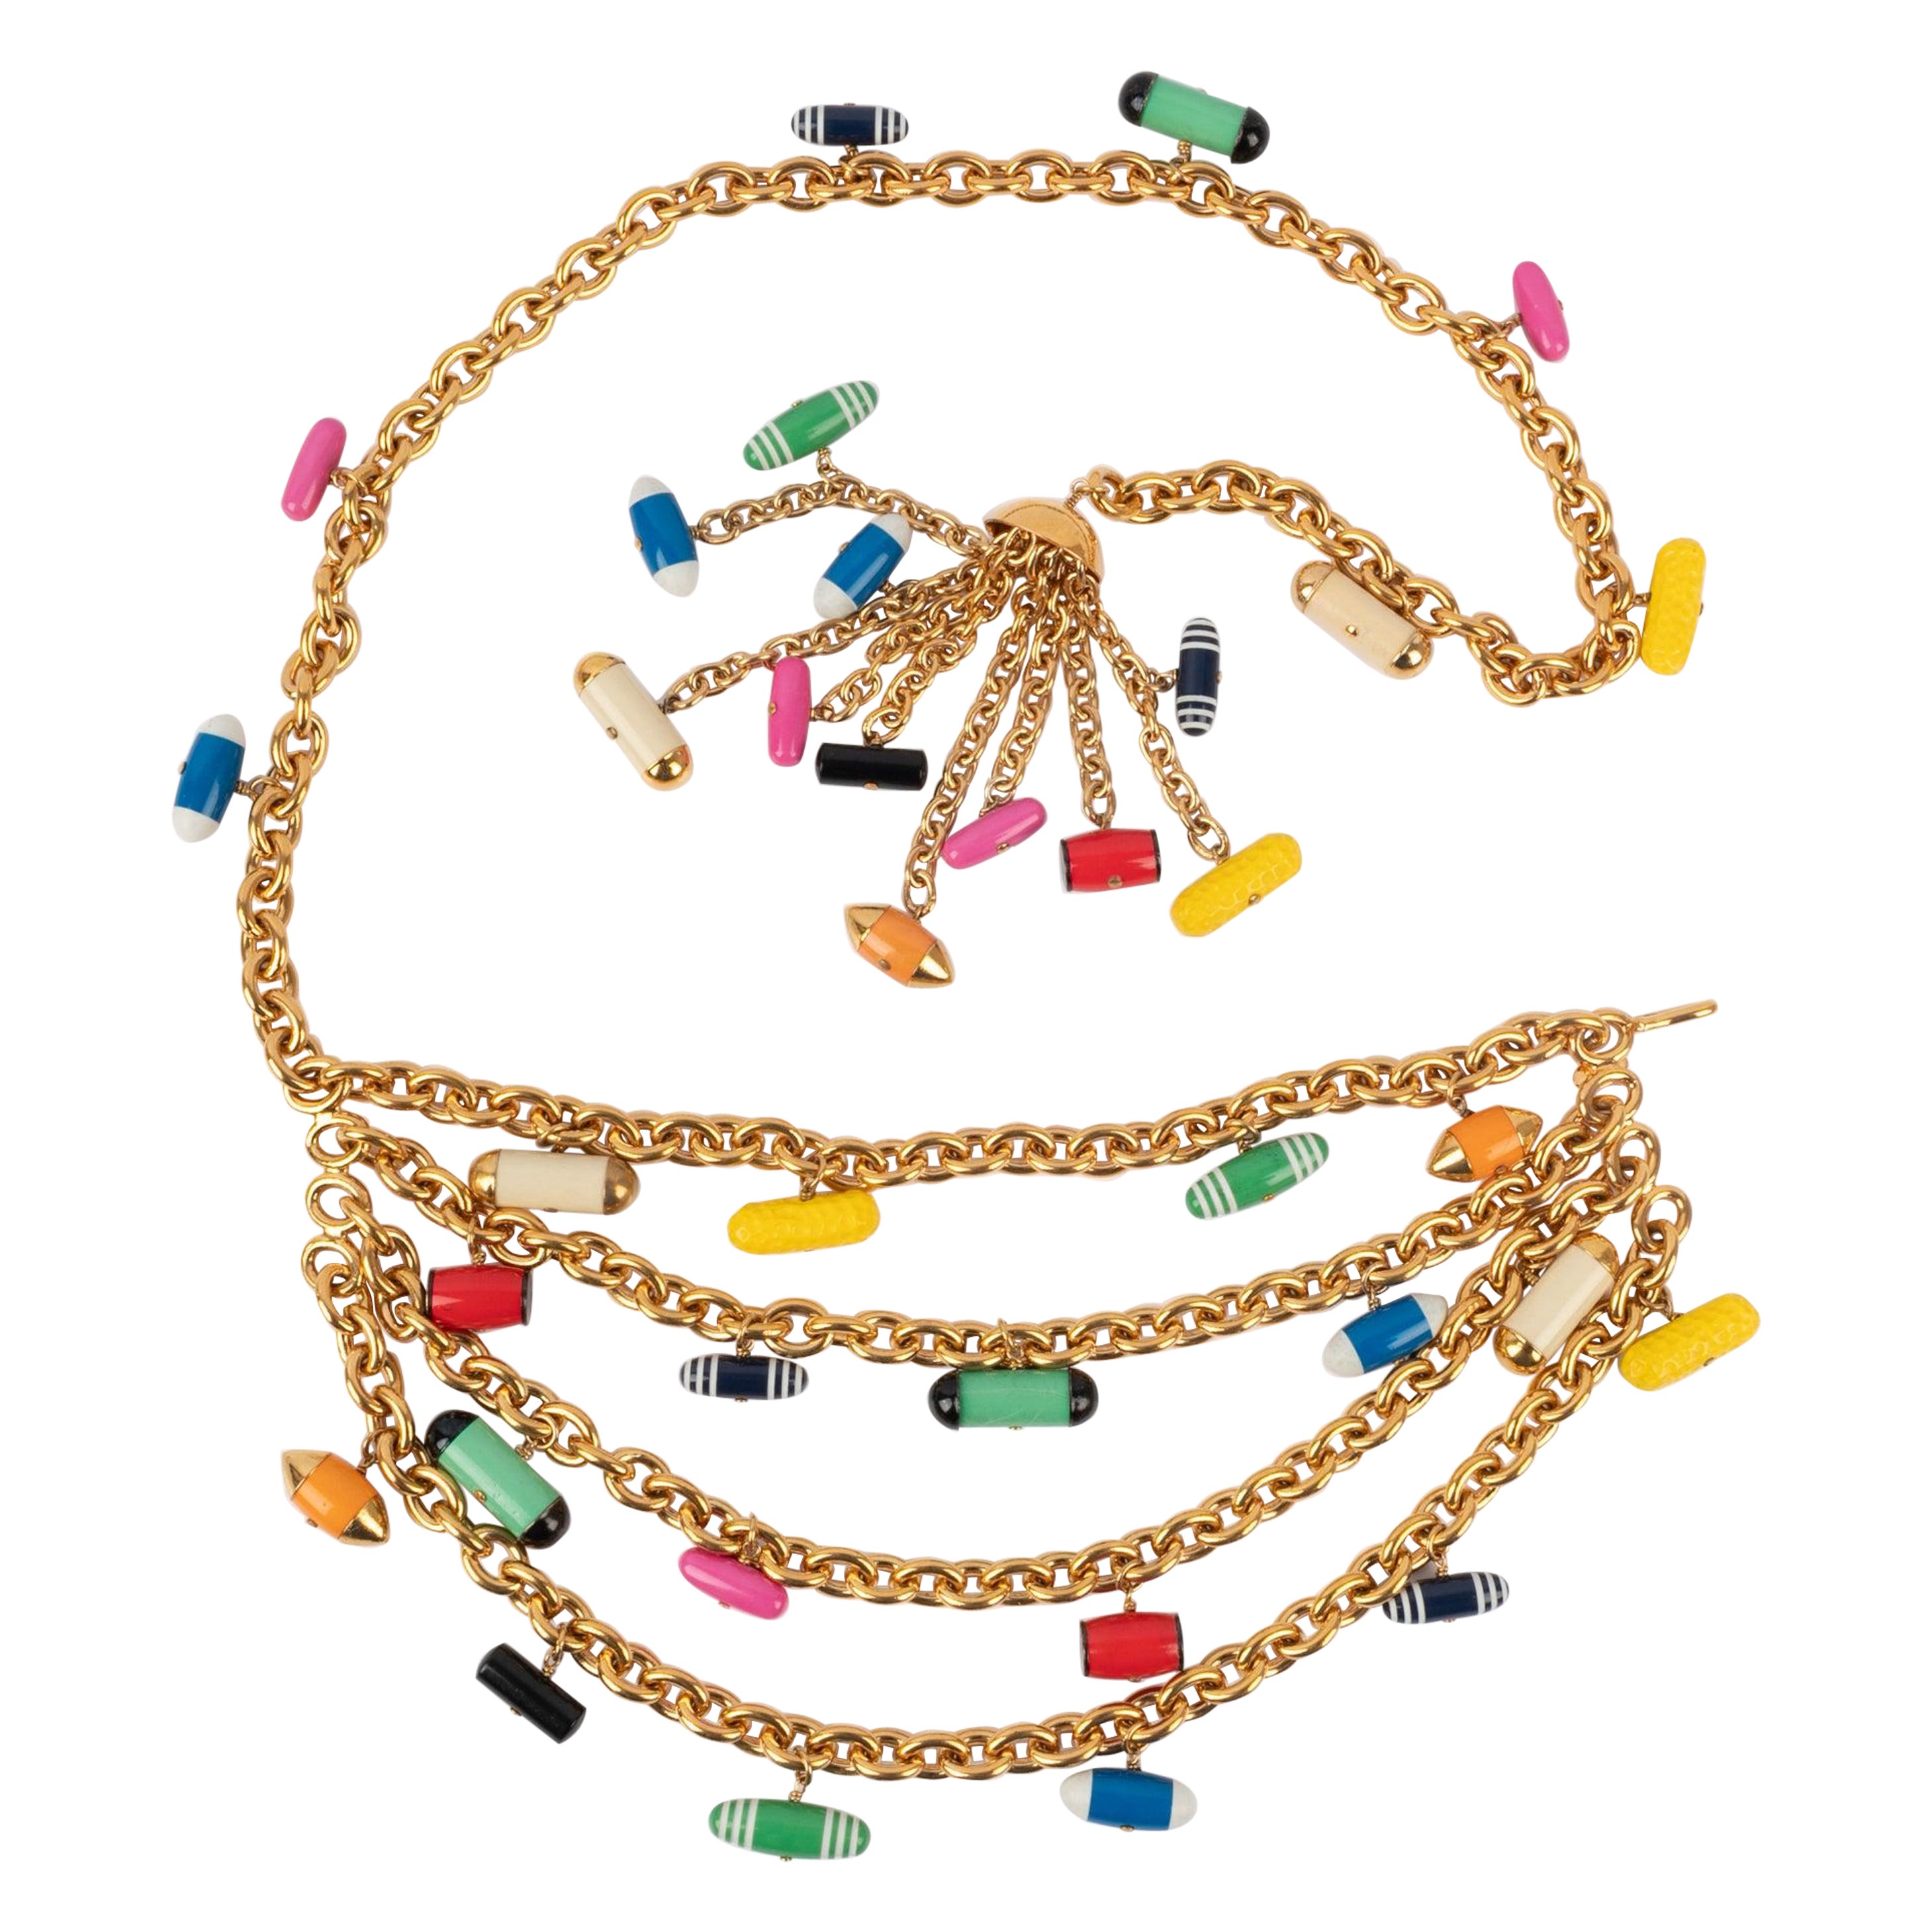 Chanel Golden Metal Belt Ornamented with Multicolored Resin Charms, 1992